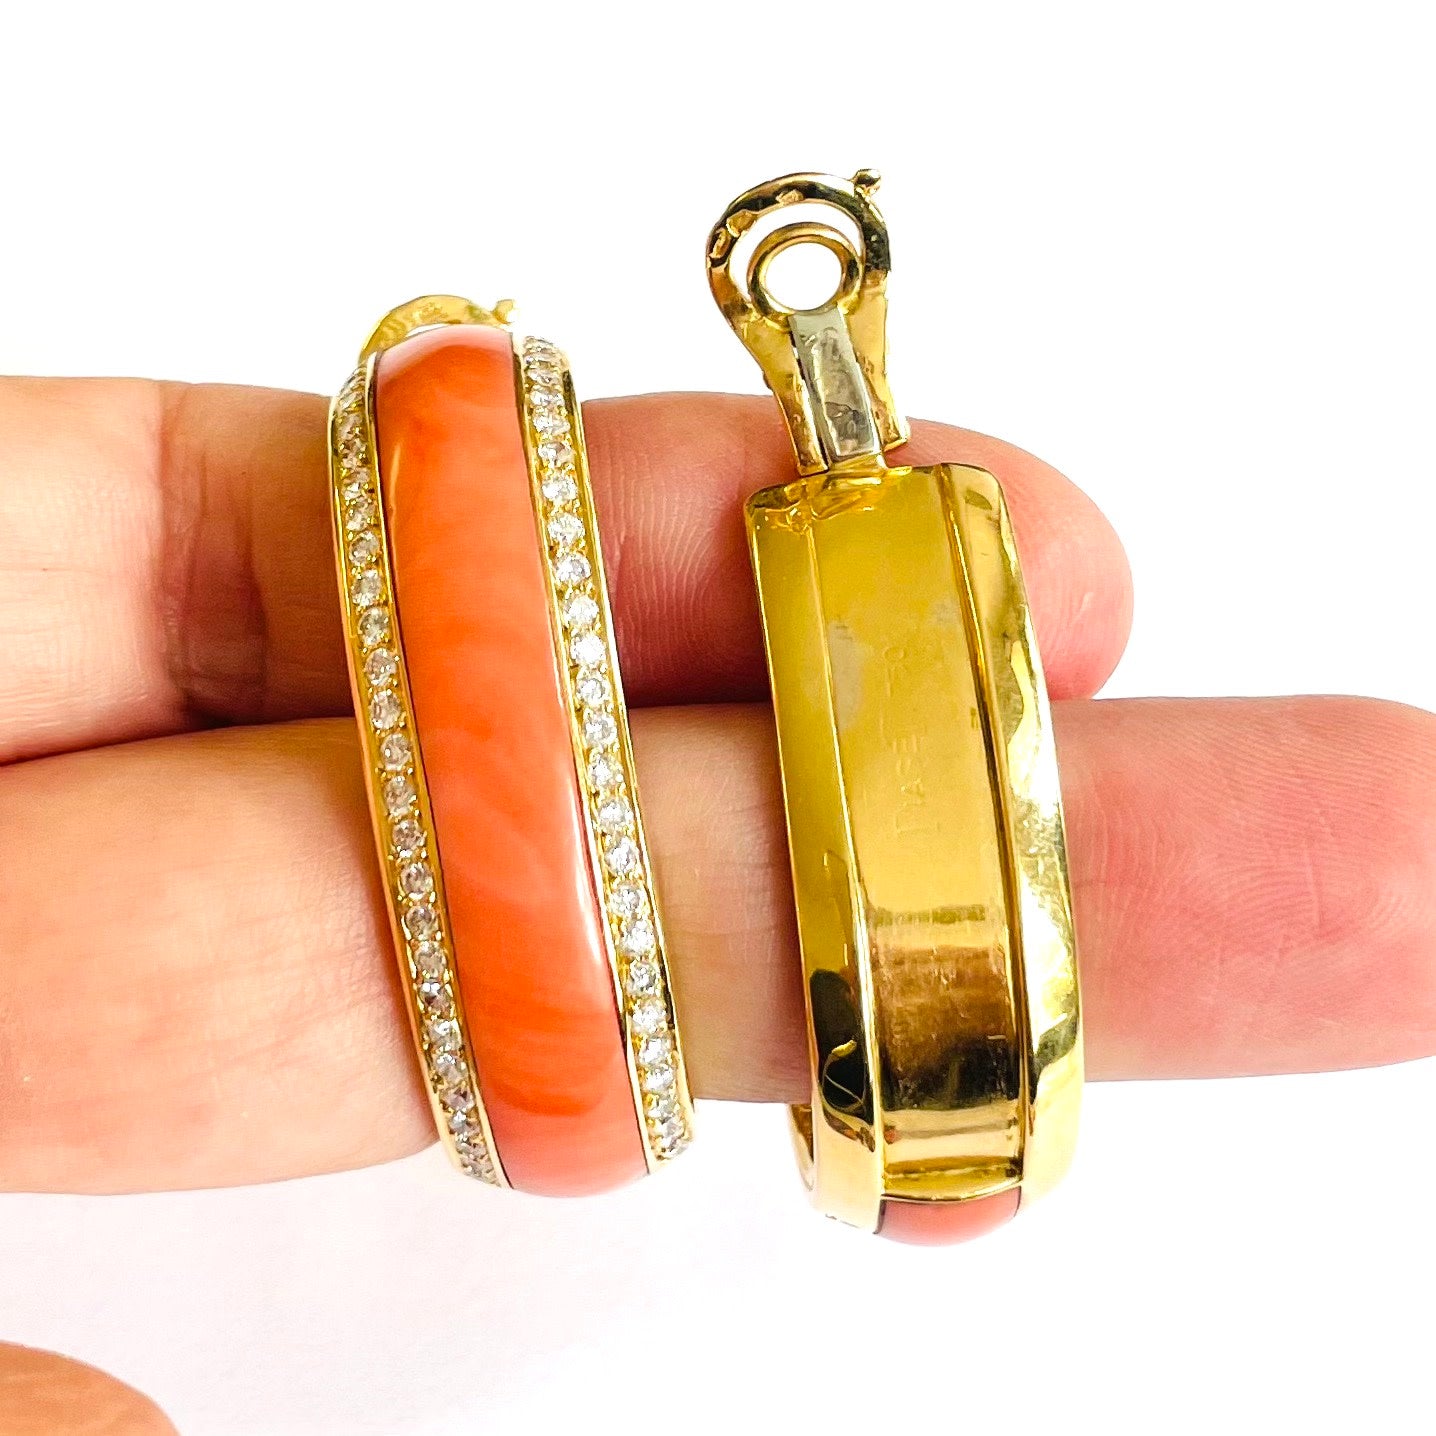 Piaget French 1980s 18KT Yellow Gold Coral & Diamond Creoles Earrings close-up front and back